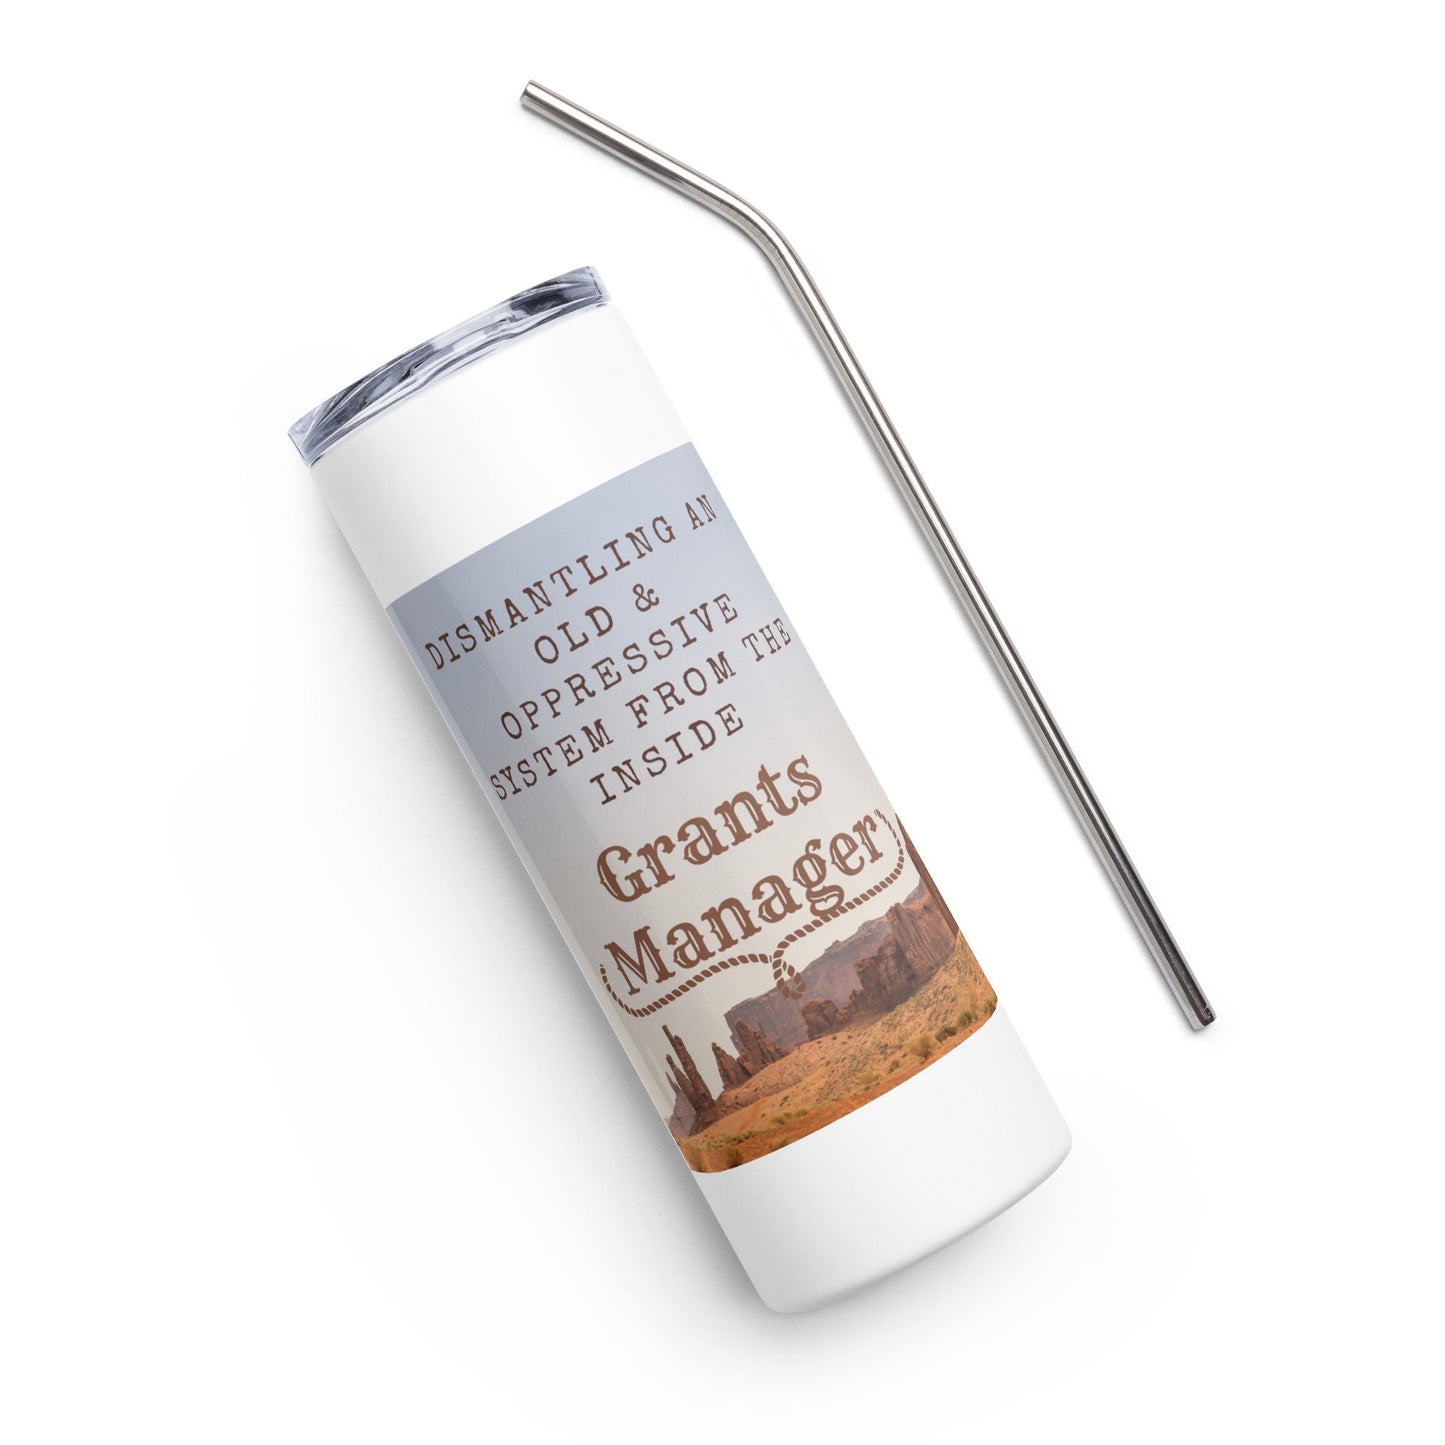 Old West Yellowstone Grants Manager Stainless steel tumbler-recalciGrant